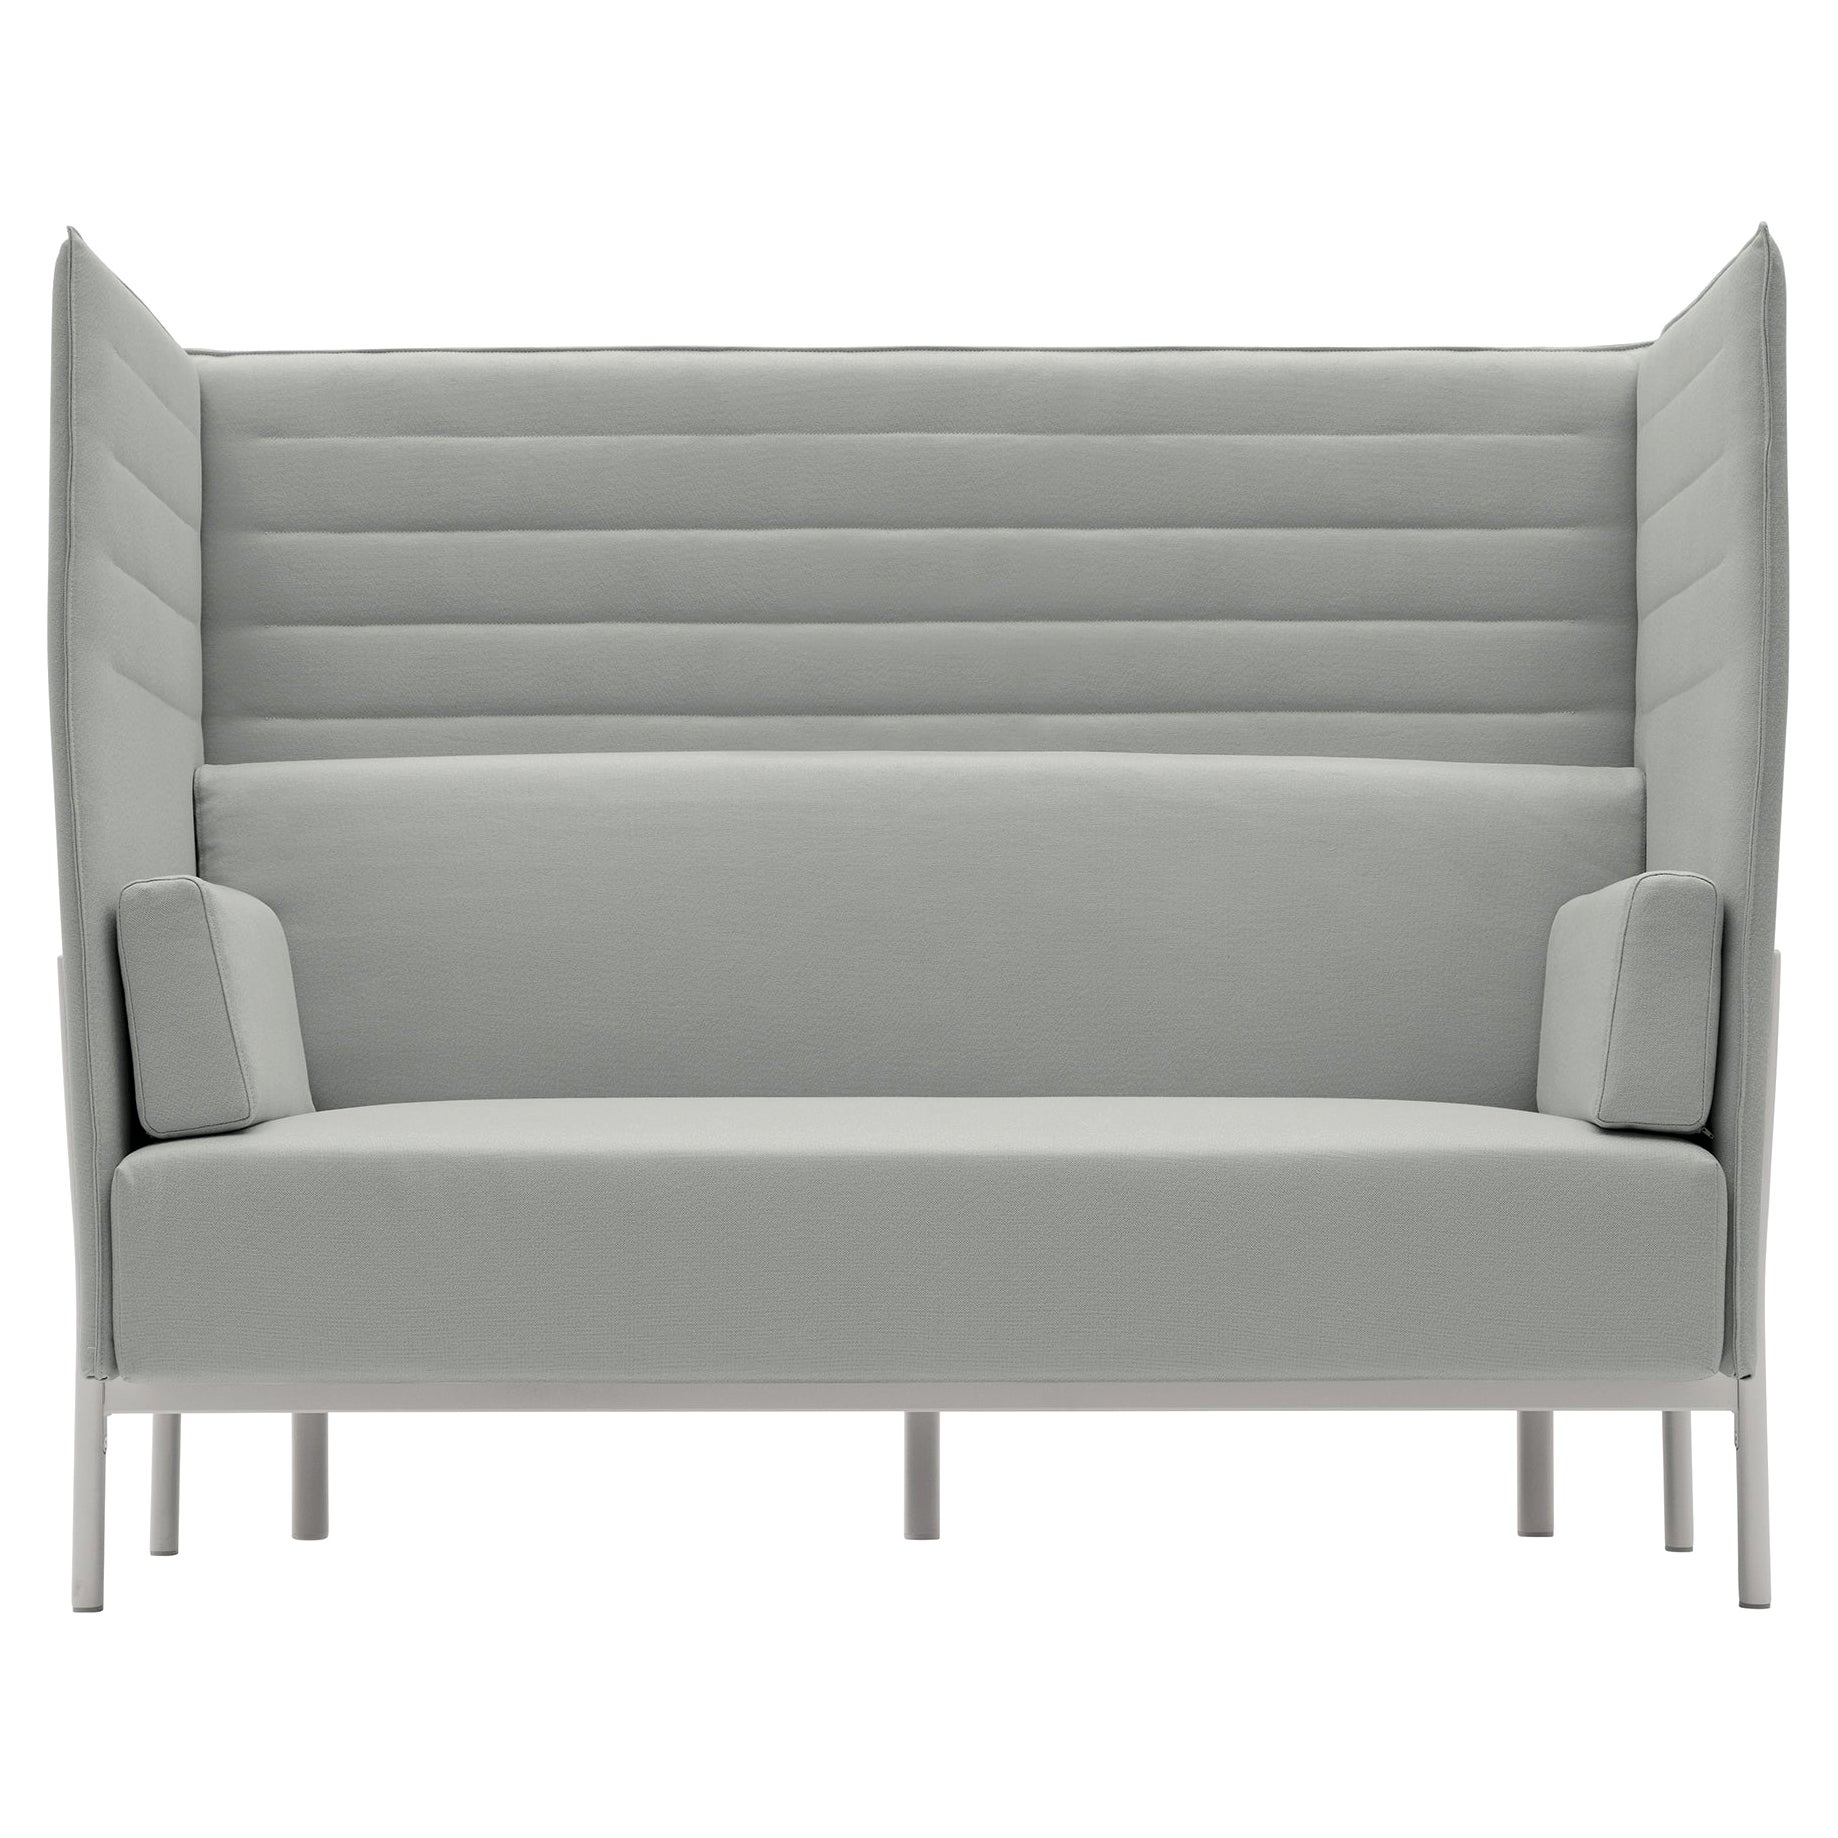 Alias 863 Eleven High Back 2 Seater Sofa in Grey &White Lacquered Aluminum Frame For Sale